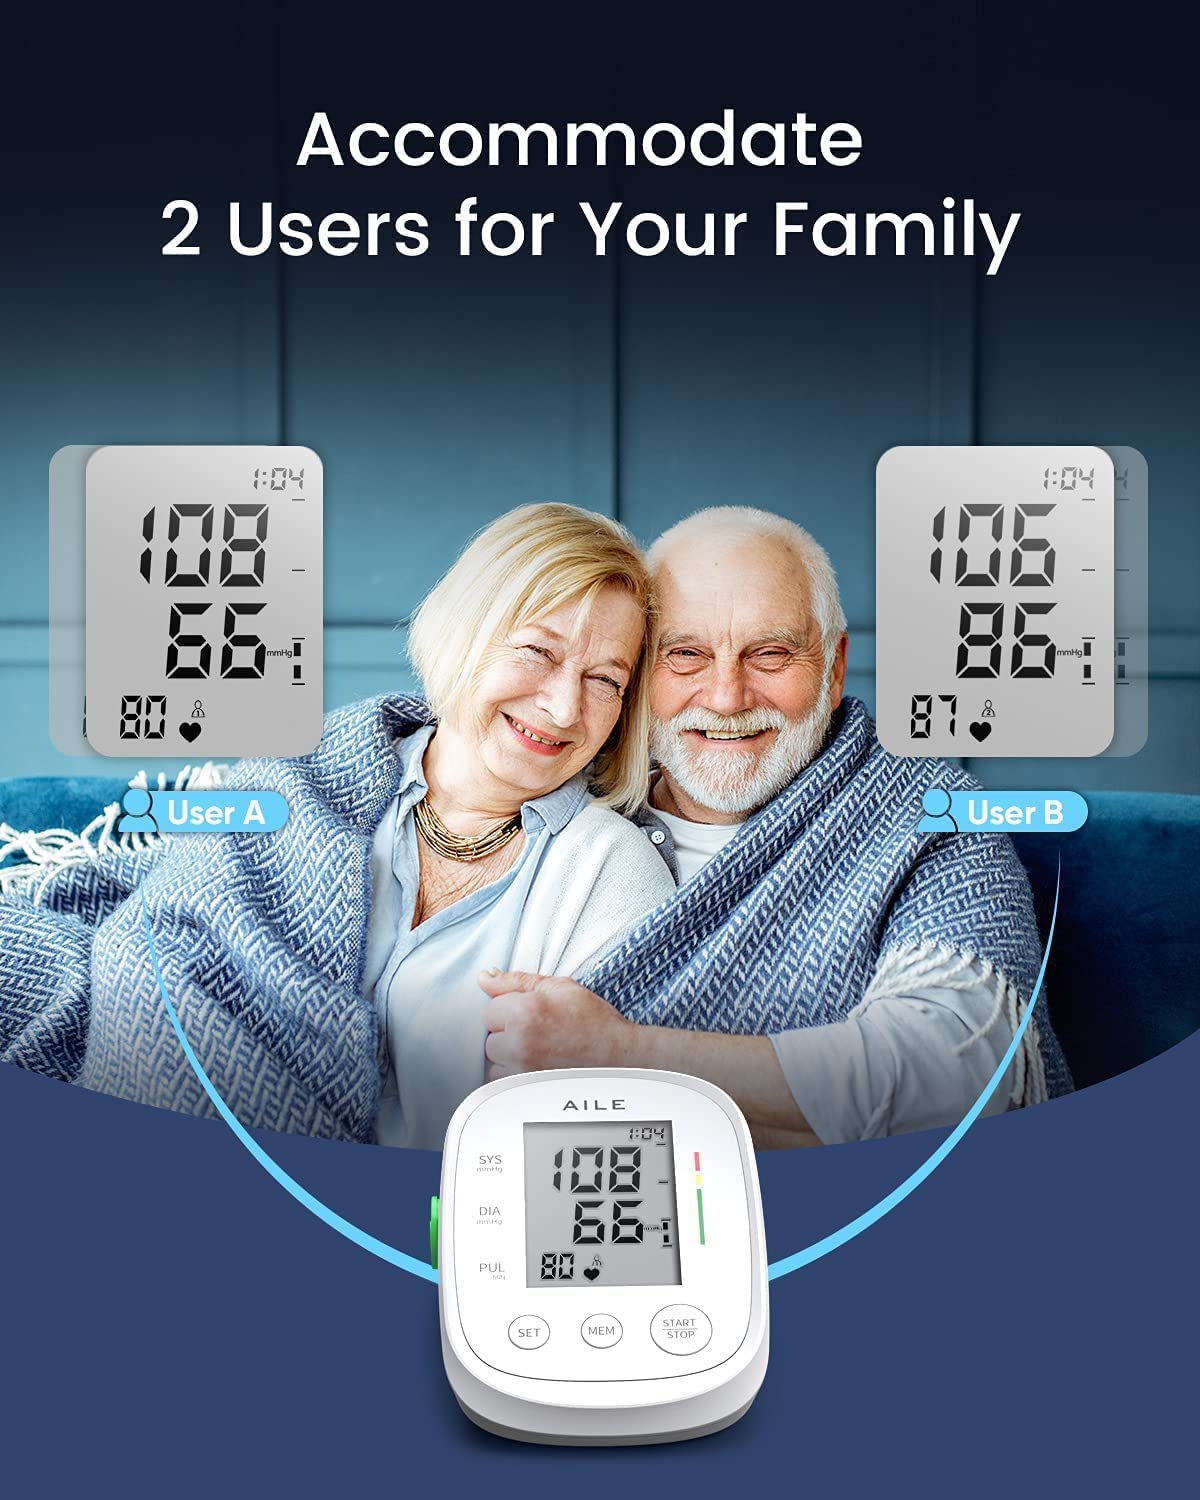  Blood Pressure Monitor for home use: AILE Blood